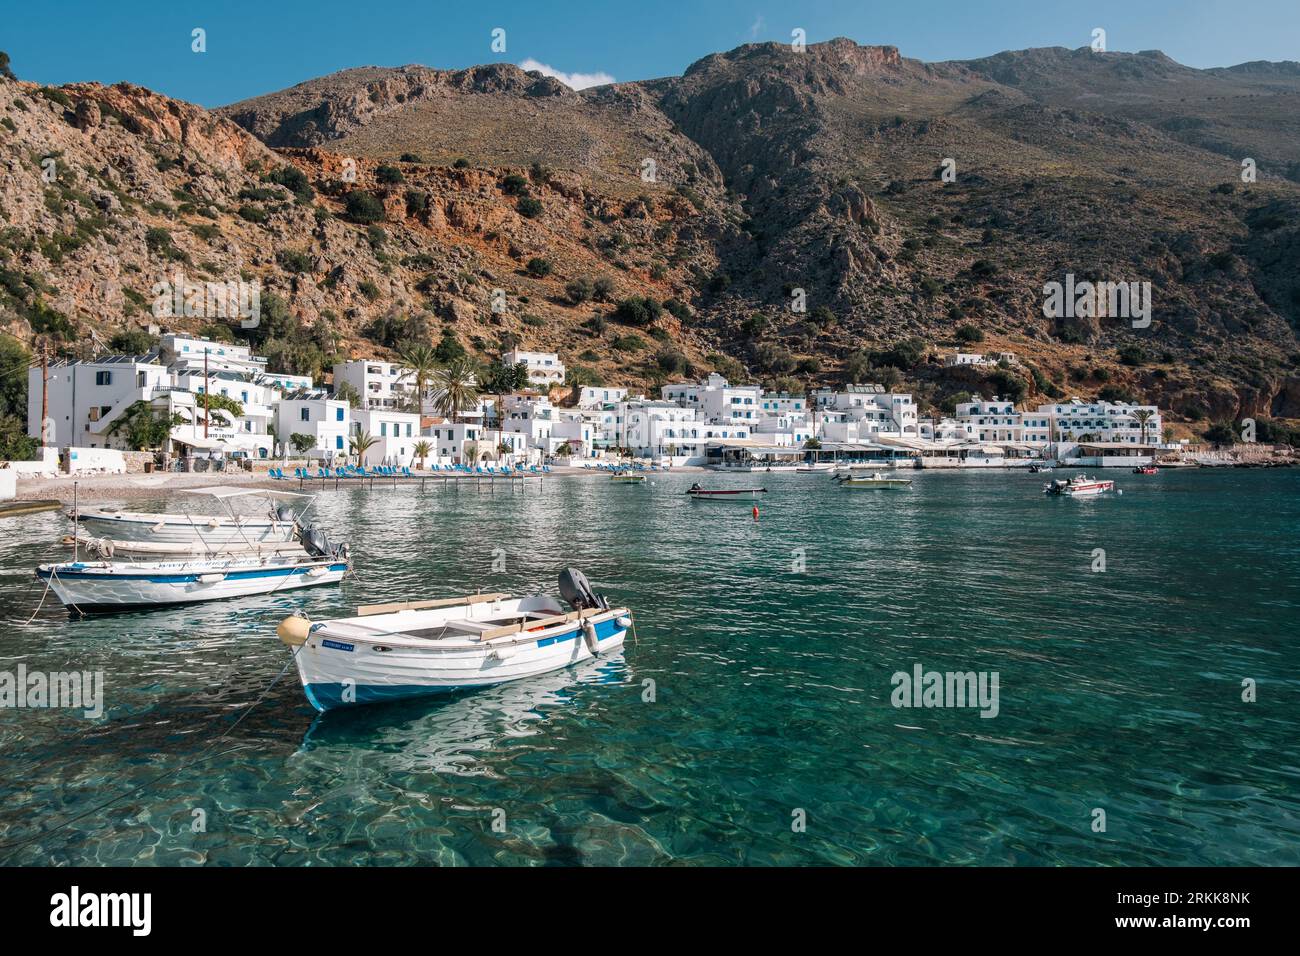 Small boats float on clear, emerald waters of the sea in the picturesque, white-washed village of Loutro, Crete. Stock Photo